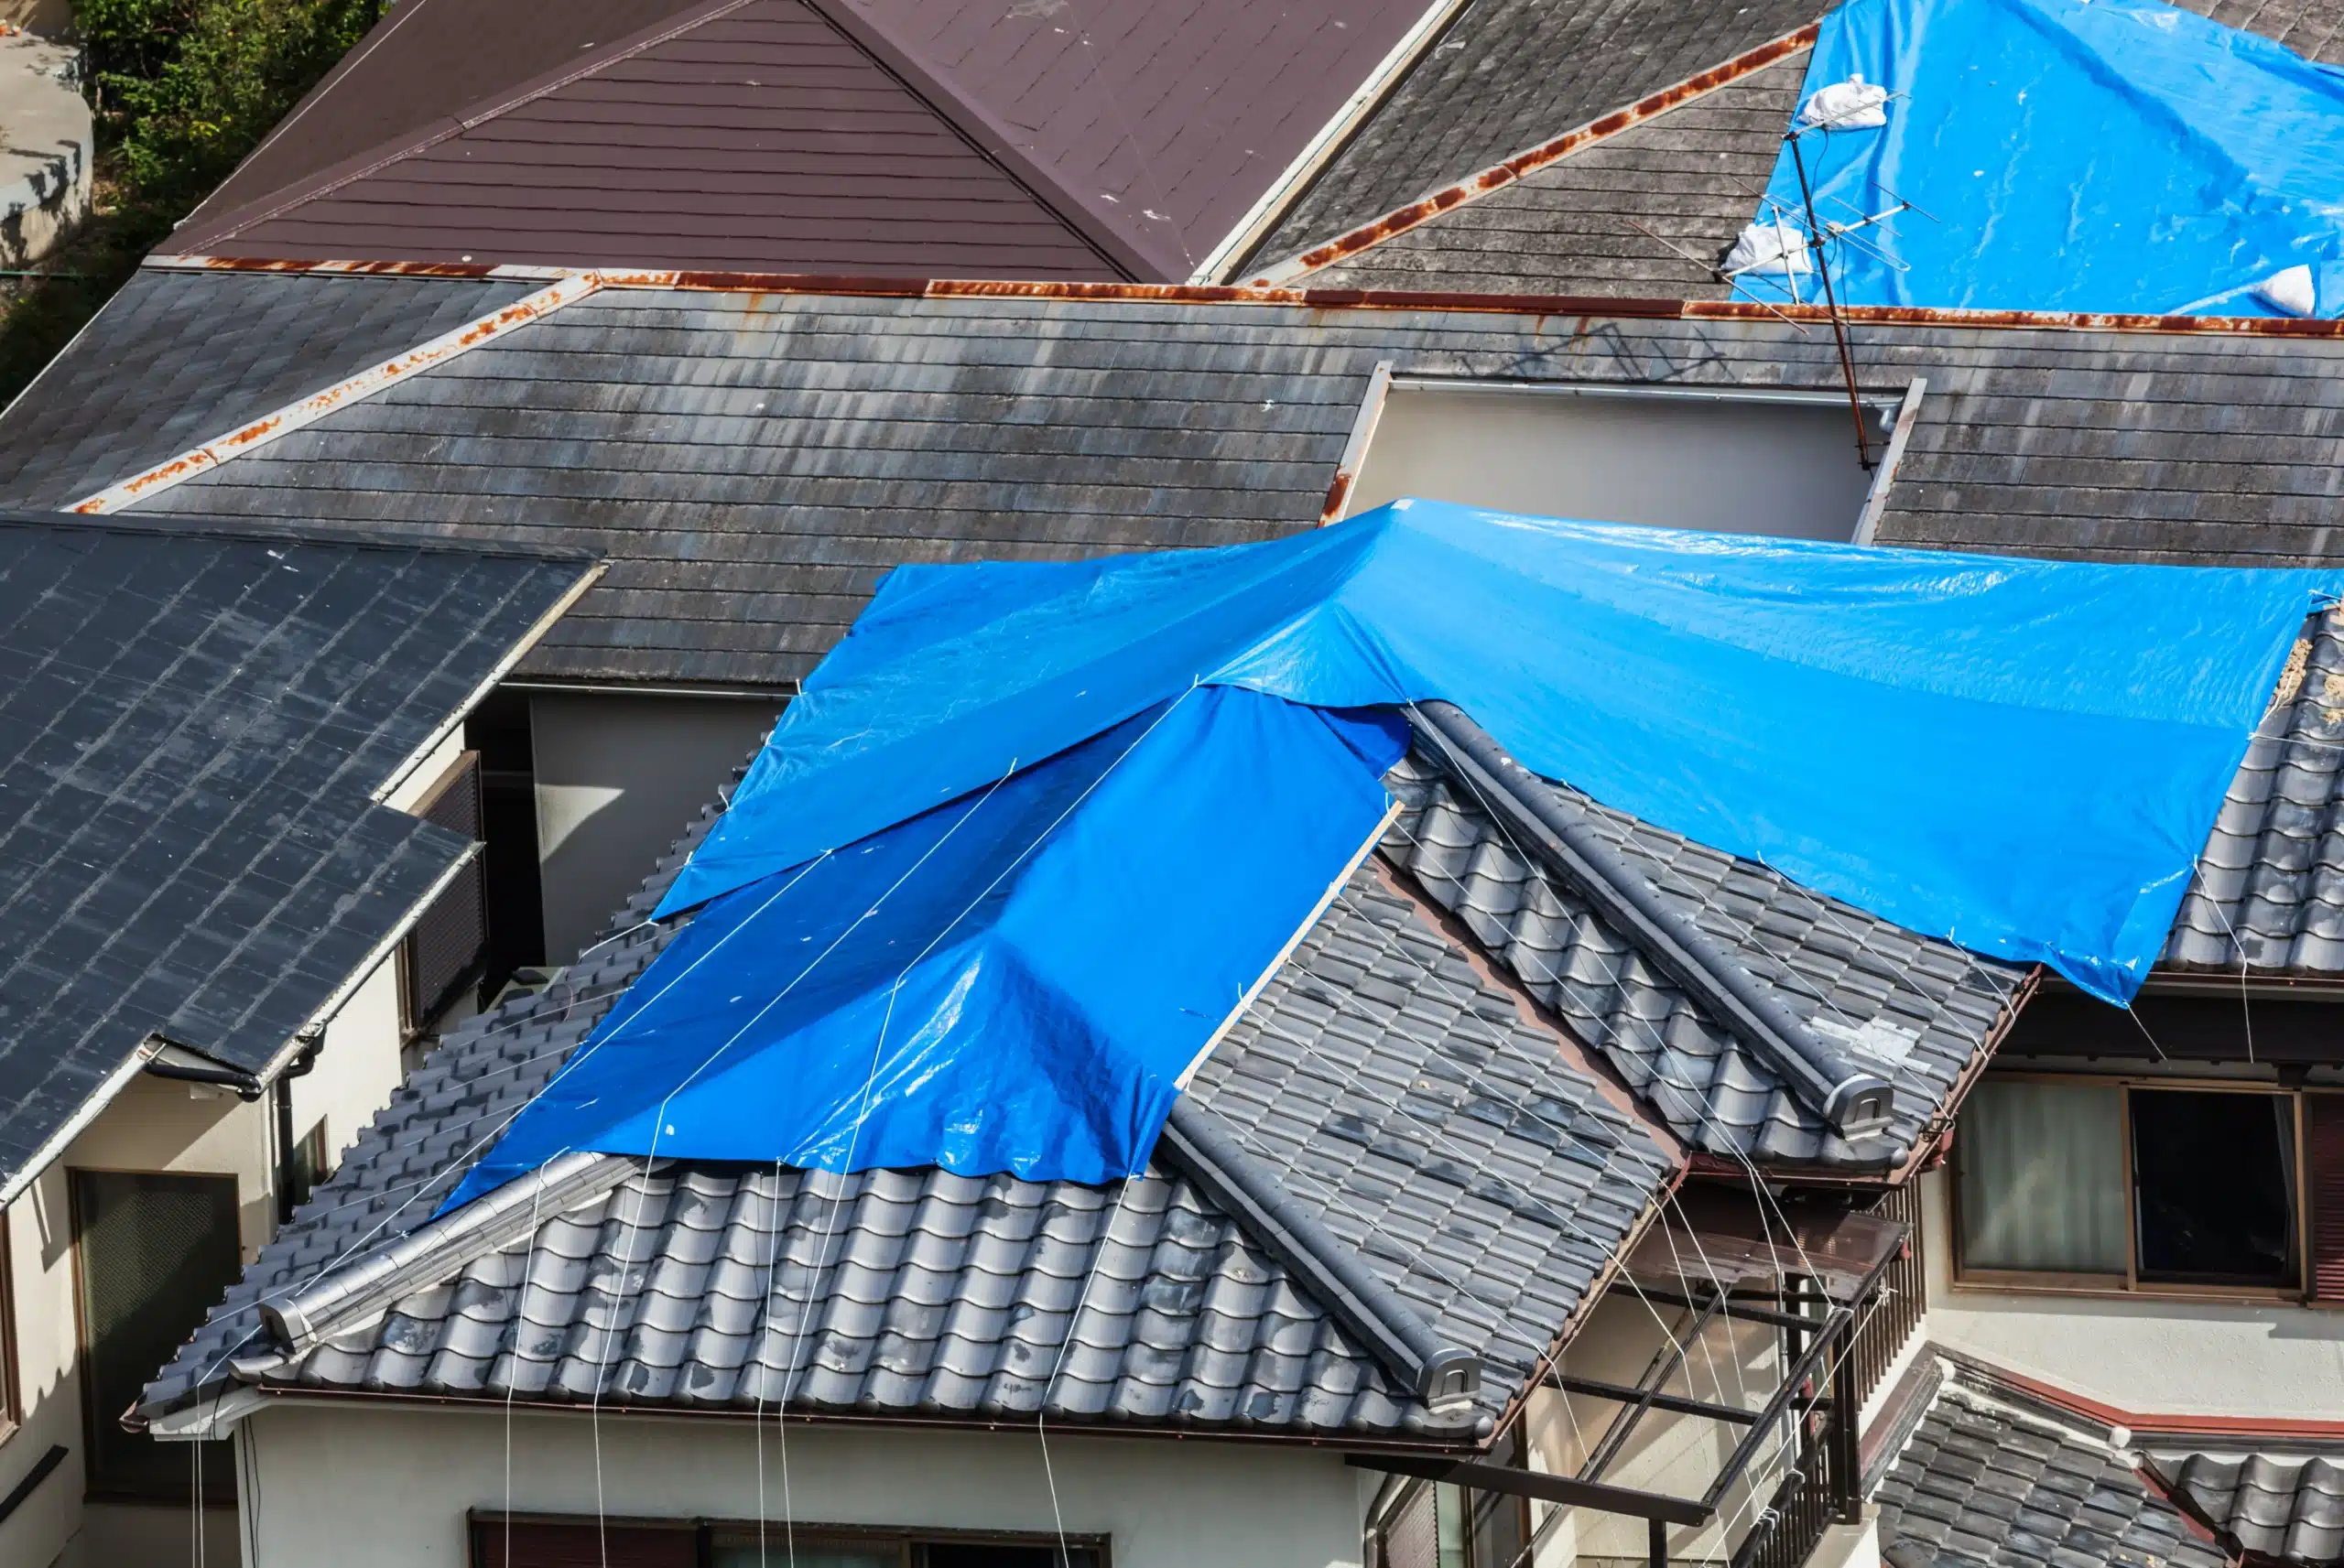 Was Your Roof Damage Claim Denied in Bad Faith?